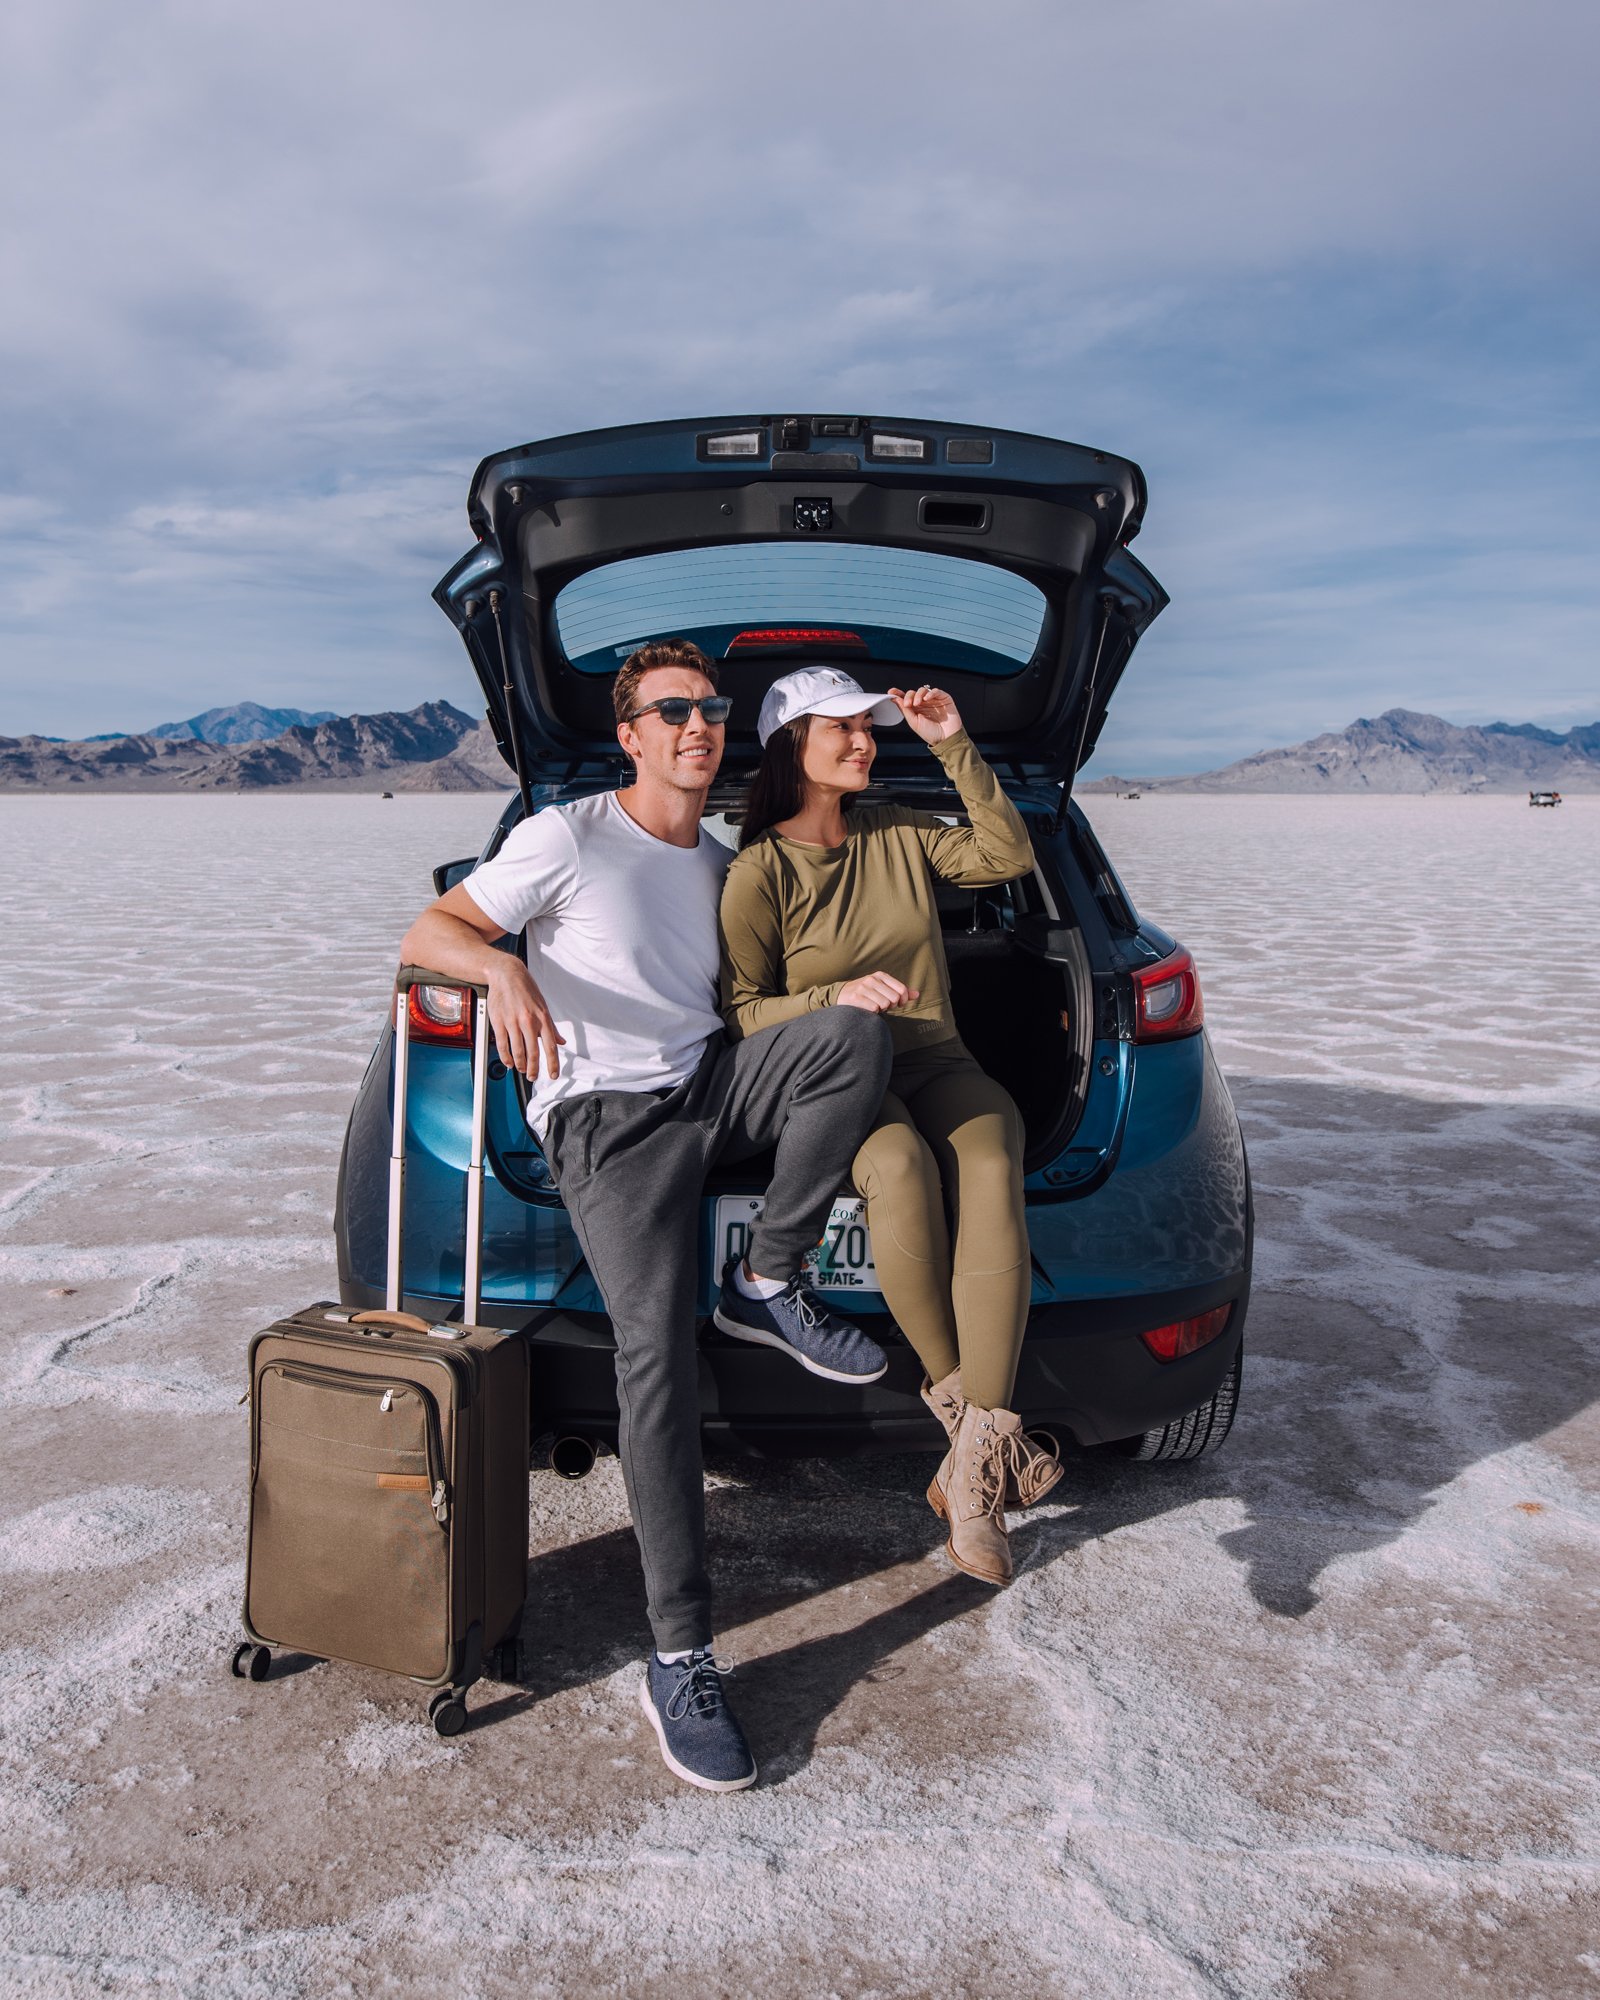 Couple sitting with a suitcase in the open trunk of a car on the Bonneville Salt Flats in Utah.